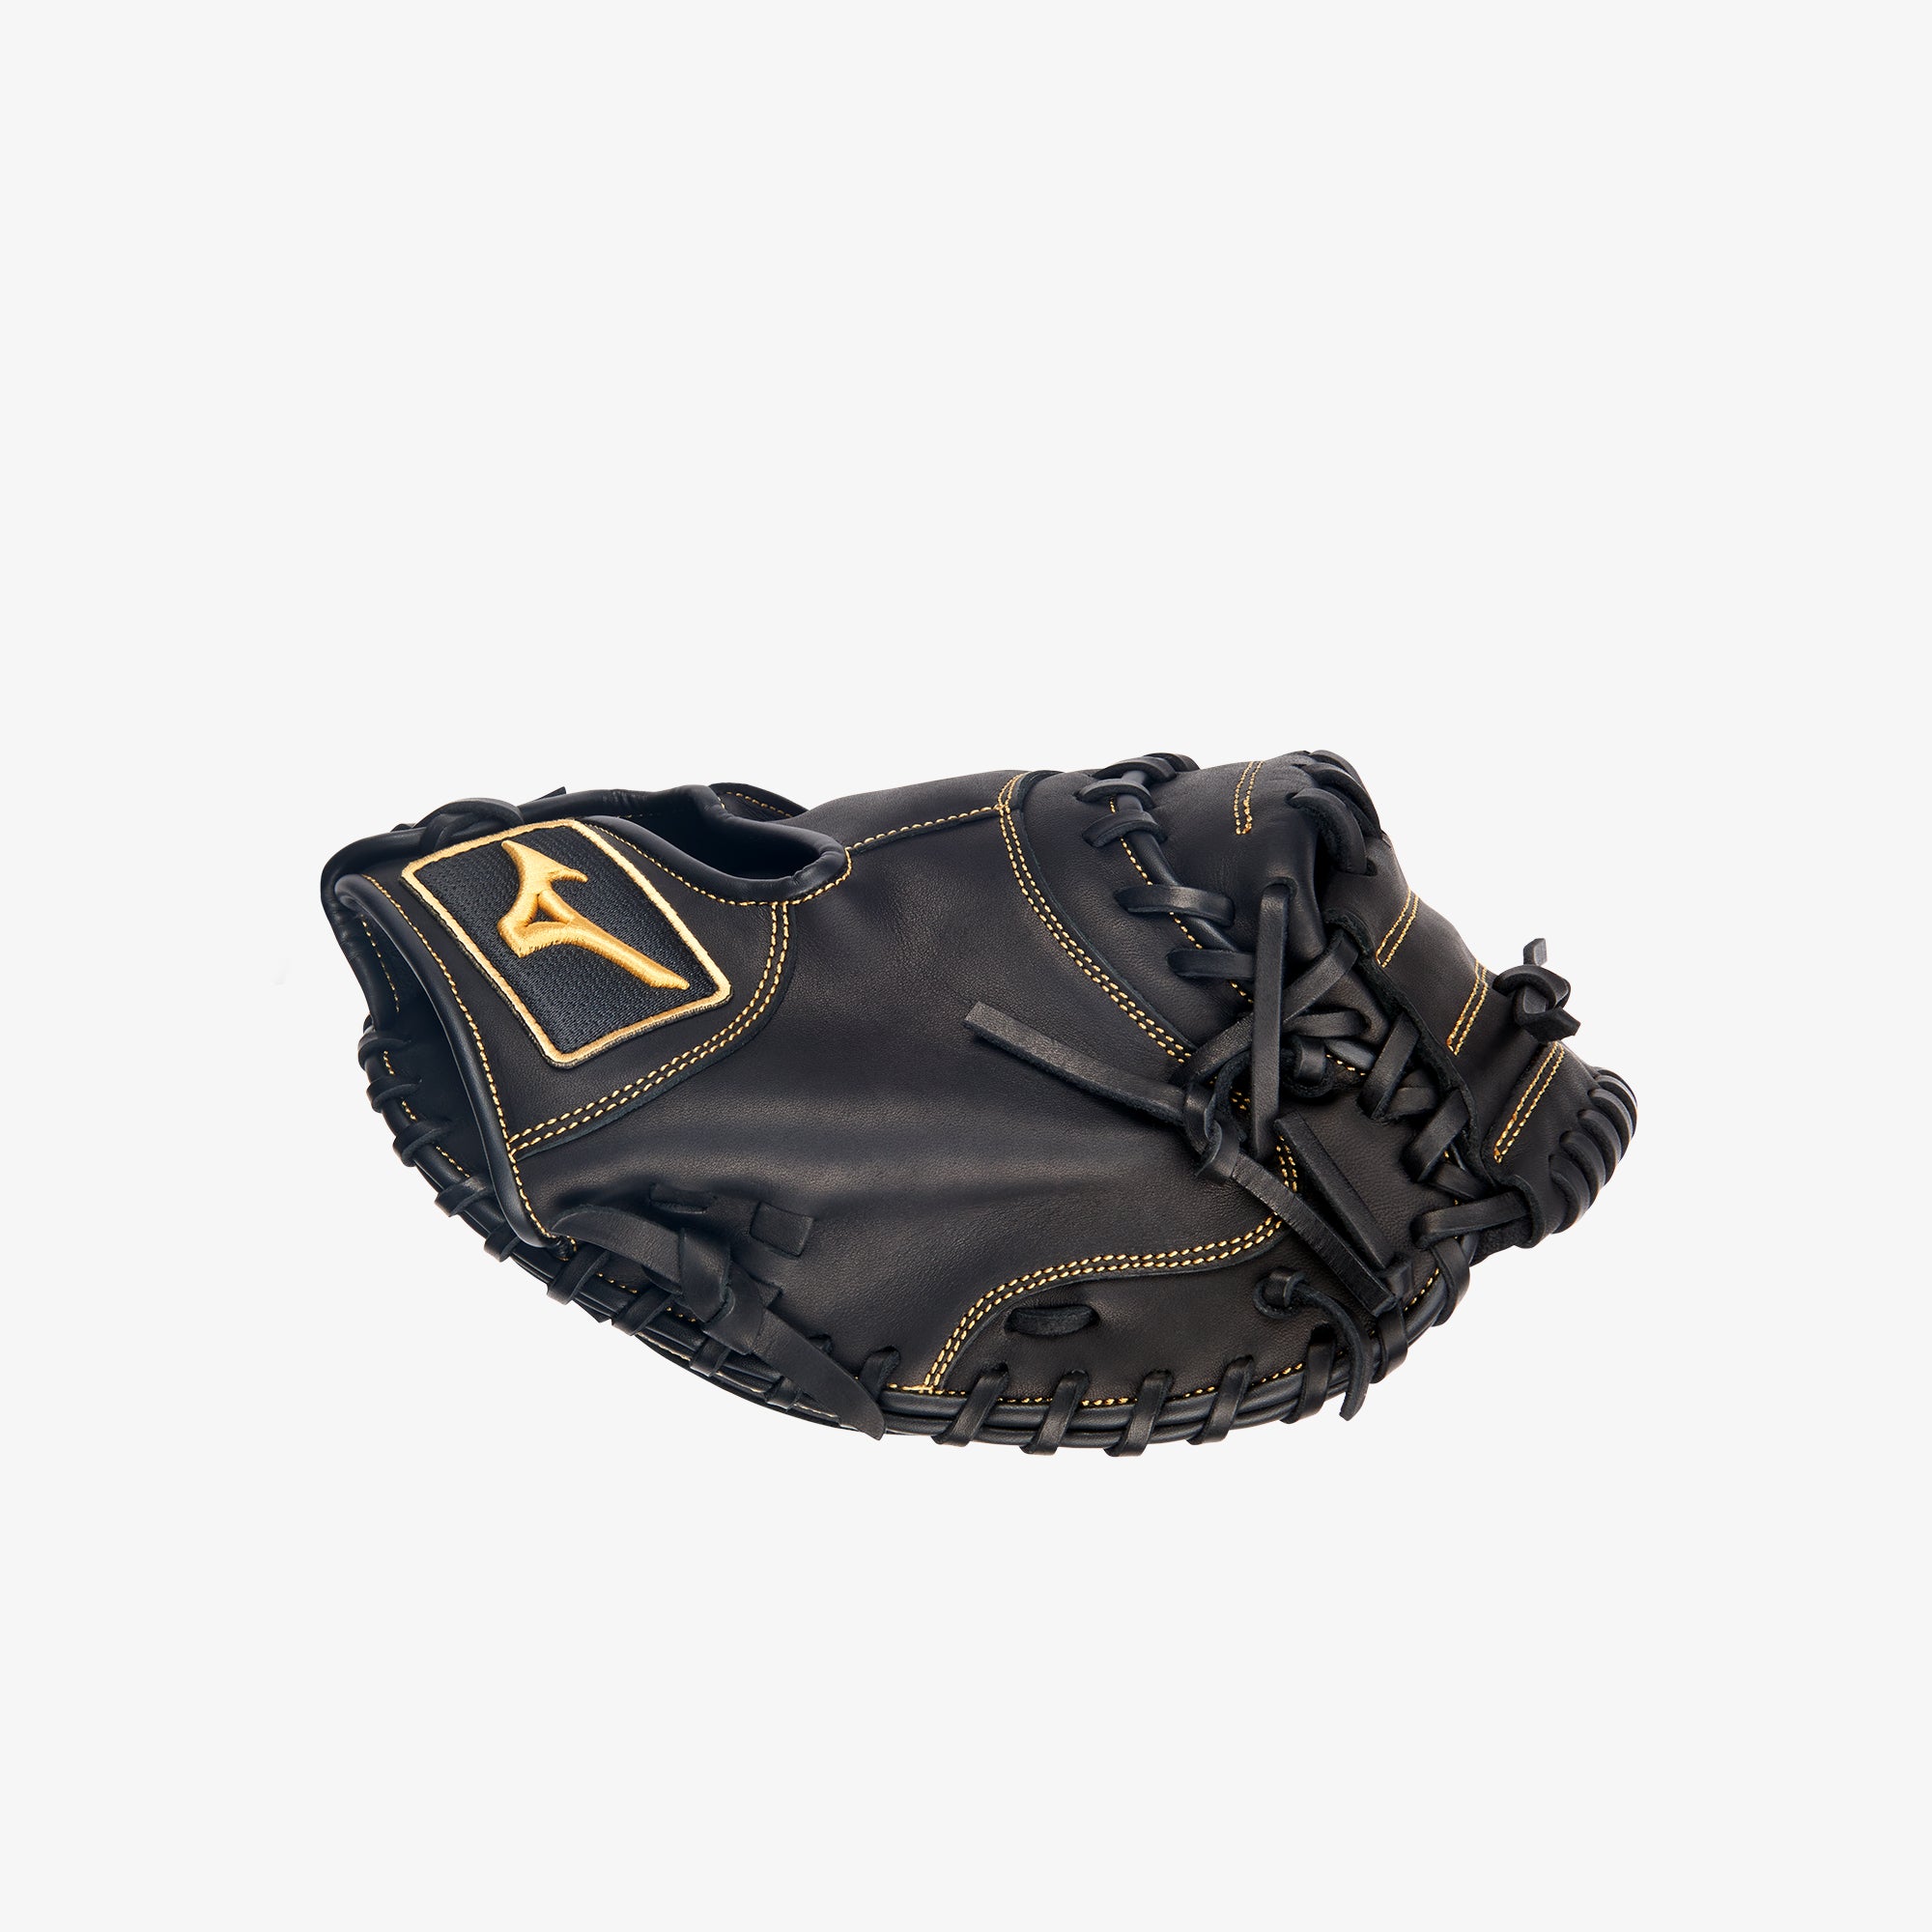 Best Catcher's Mitts: 2023 Catcher's Gloves Ratings & Reviews